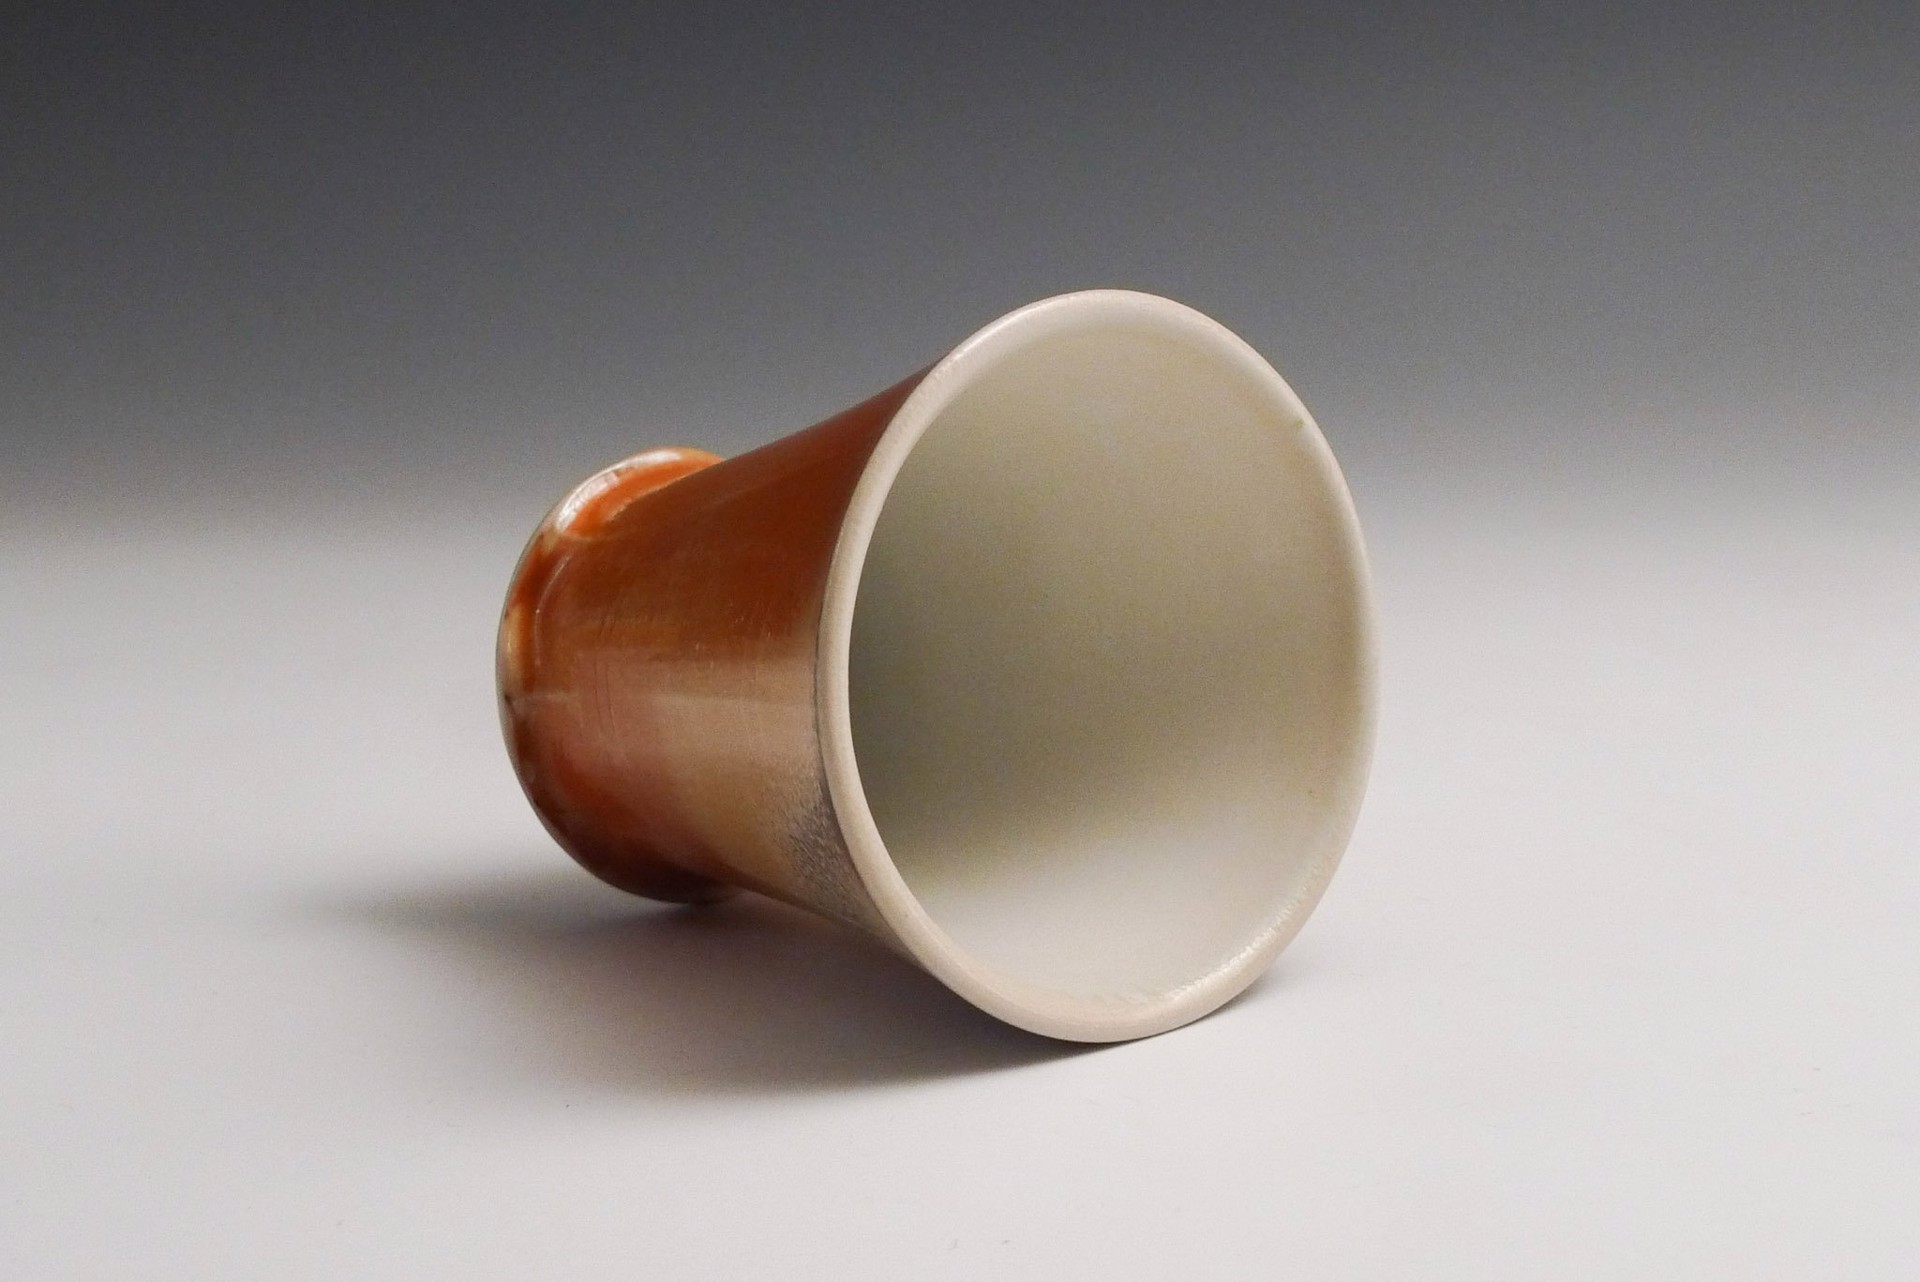 Cup by Jeff Campana